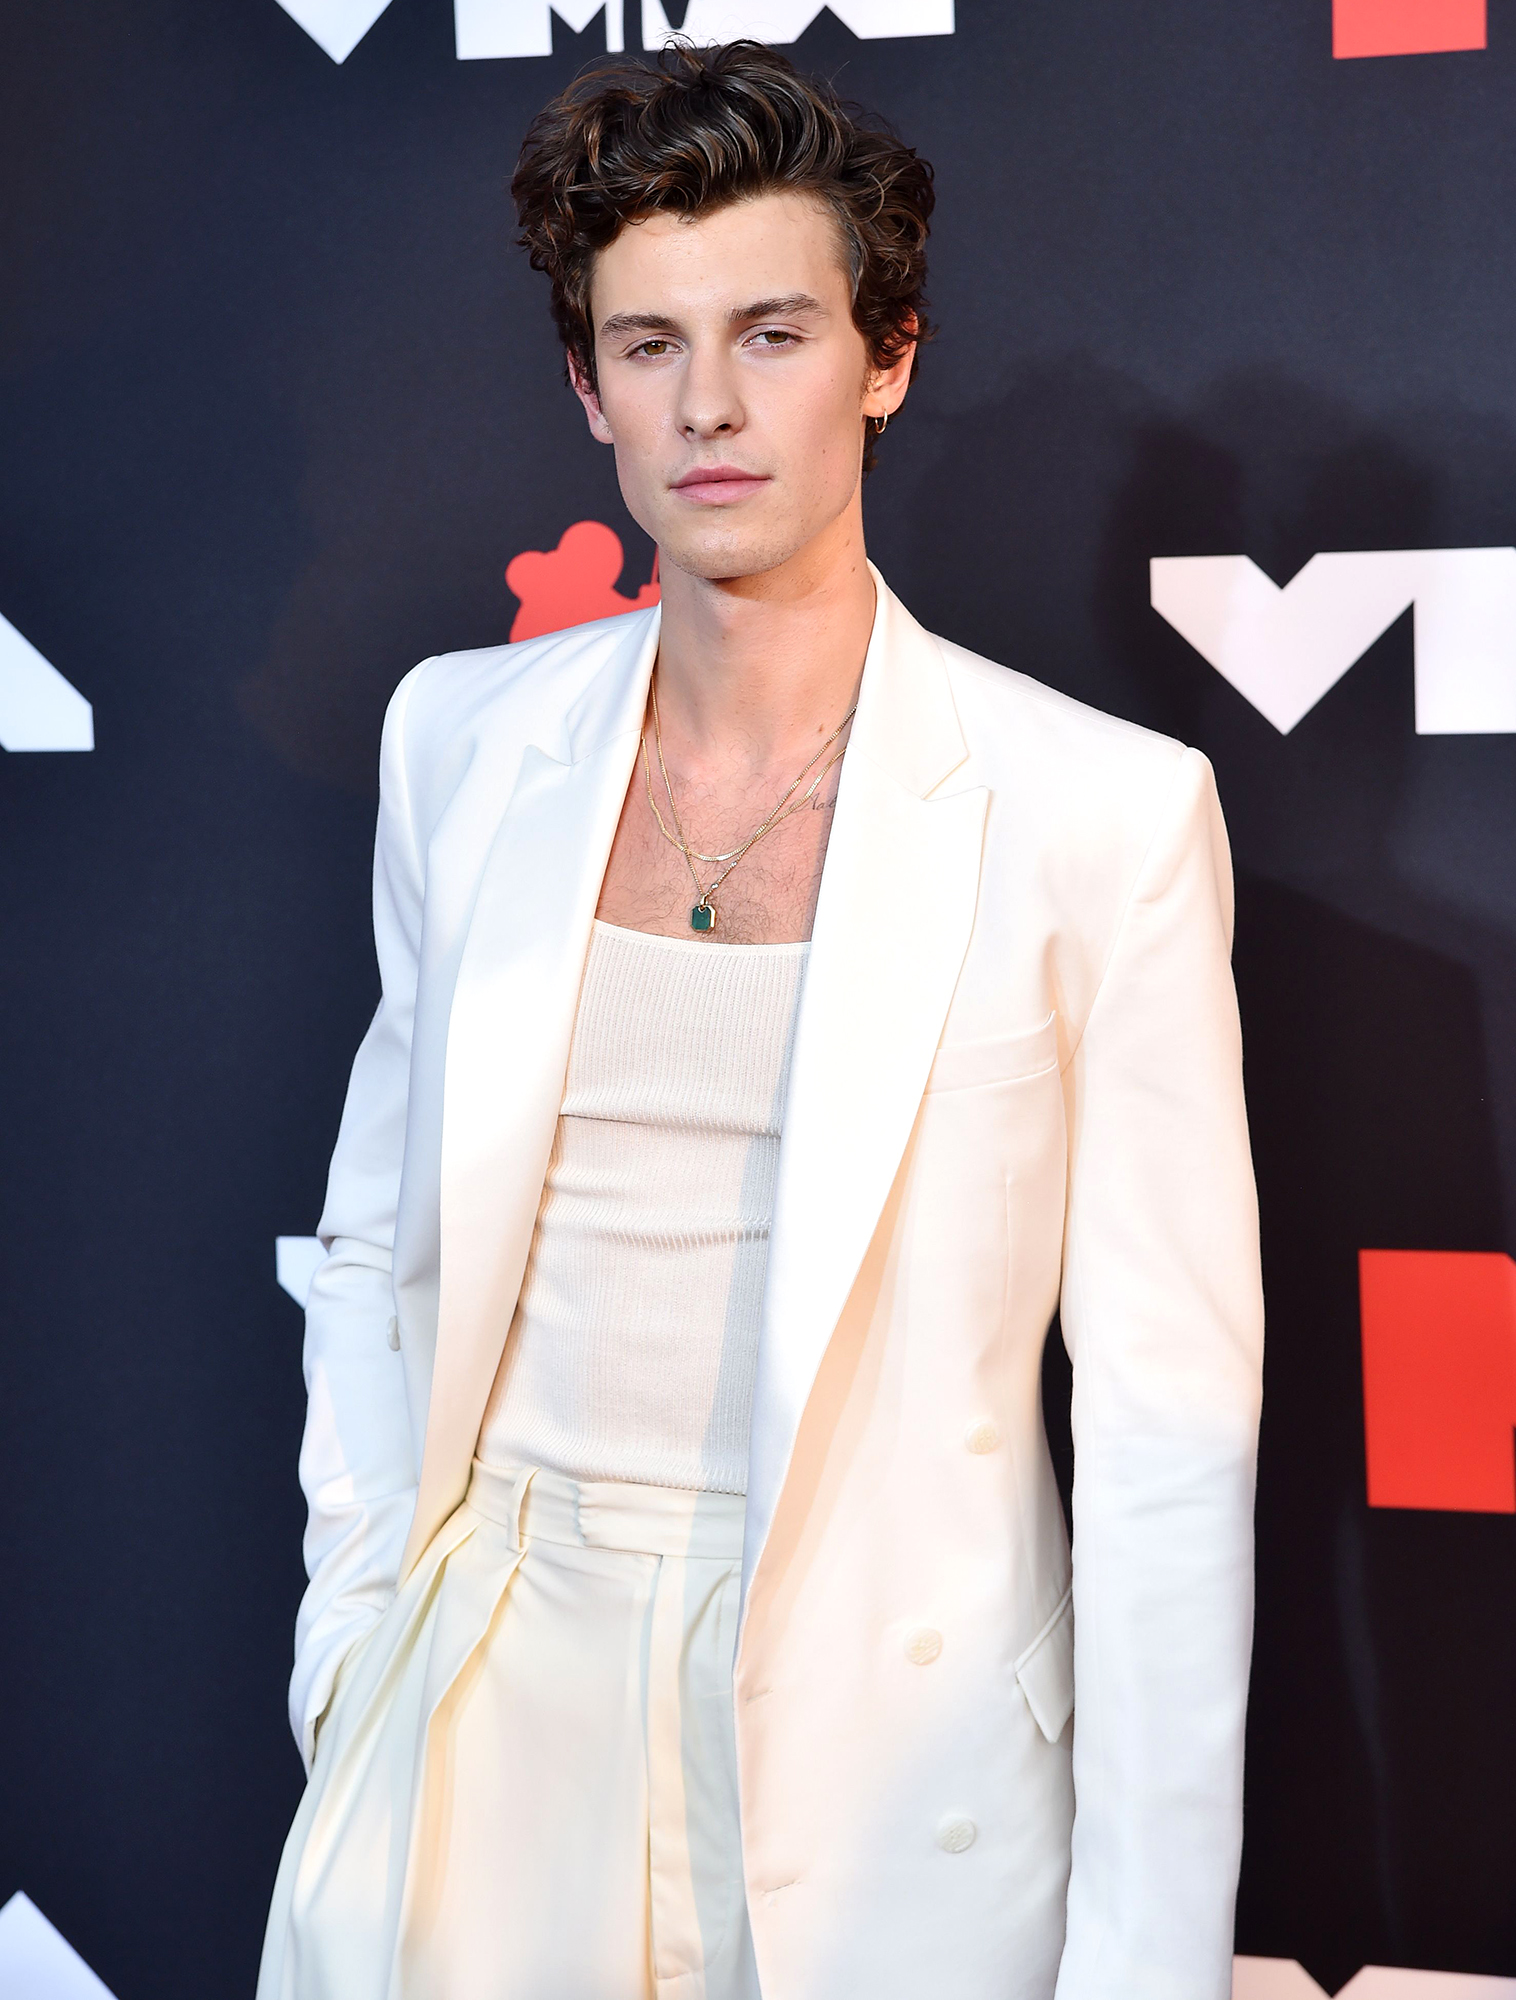 Shawn Mendes says men should not be afraid to wear crop tops